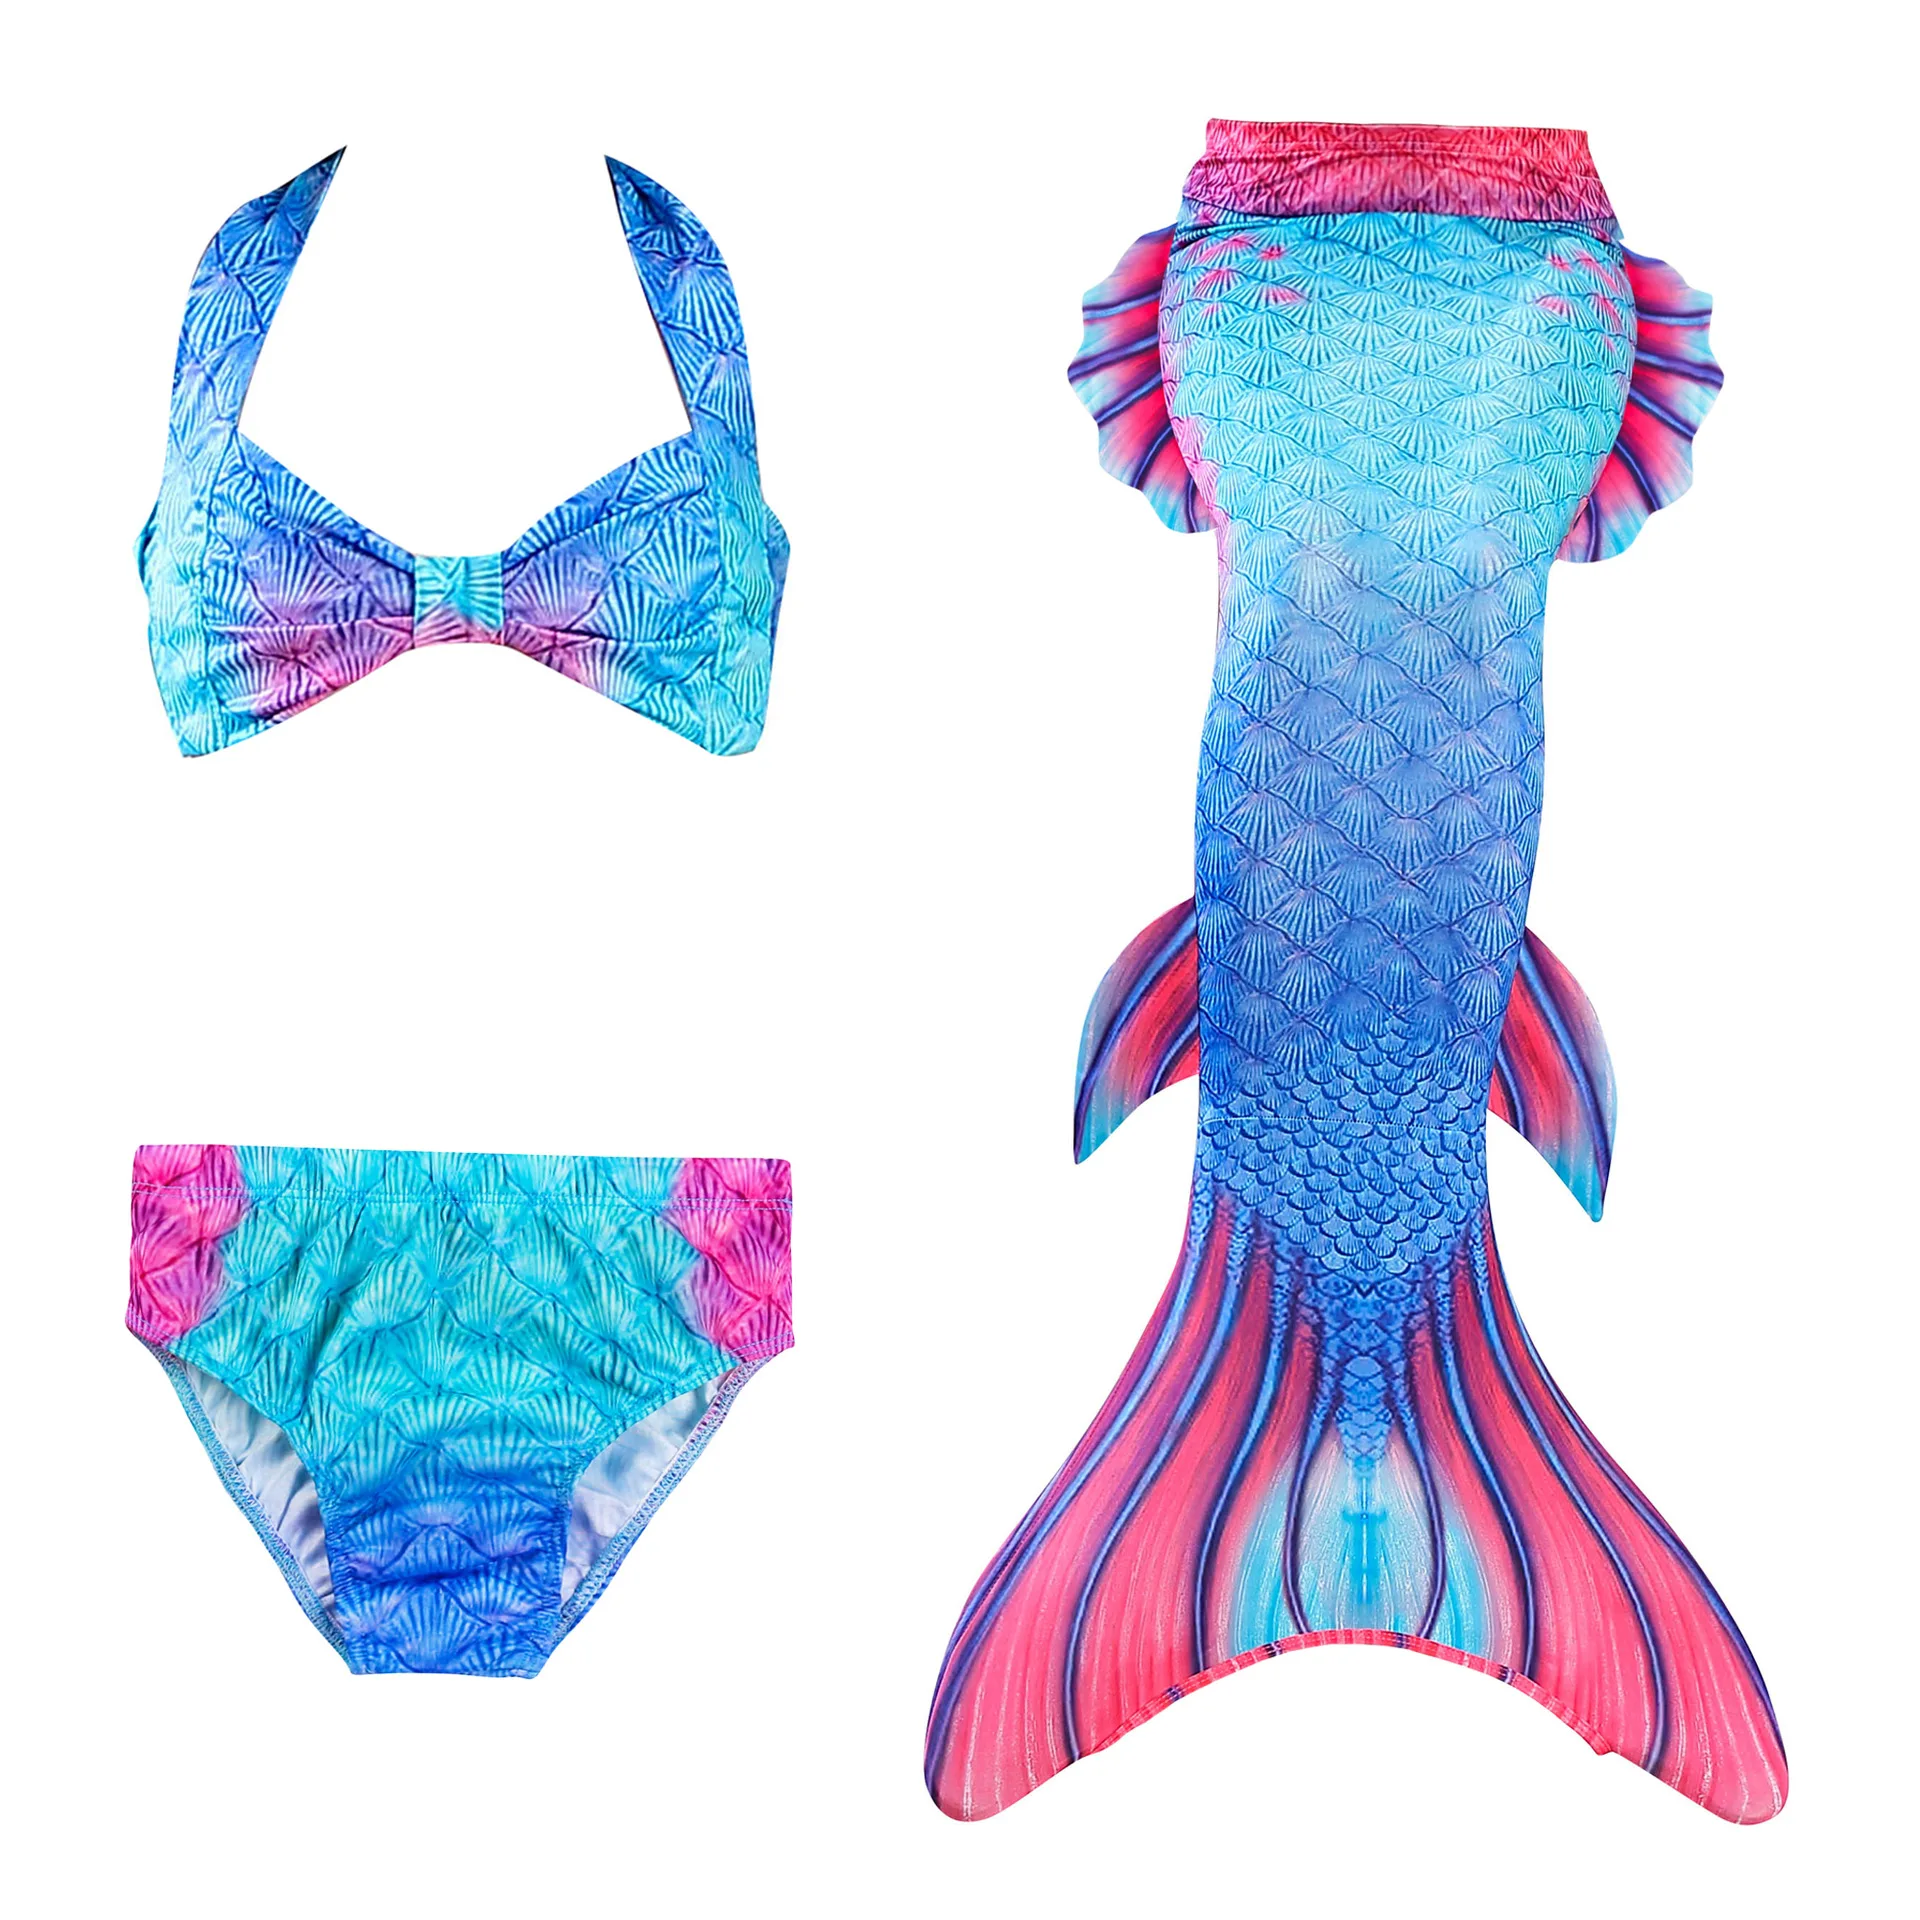 Mskseciy Girls Swimsuit 3Pcs Mermaid Tails for Swimming Costume Party Supplies Swimsuit Swimwear Bikini for 3-12Y 